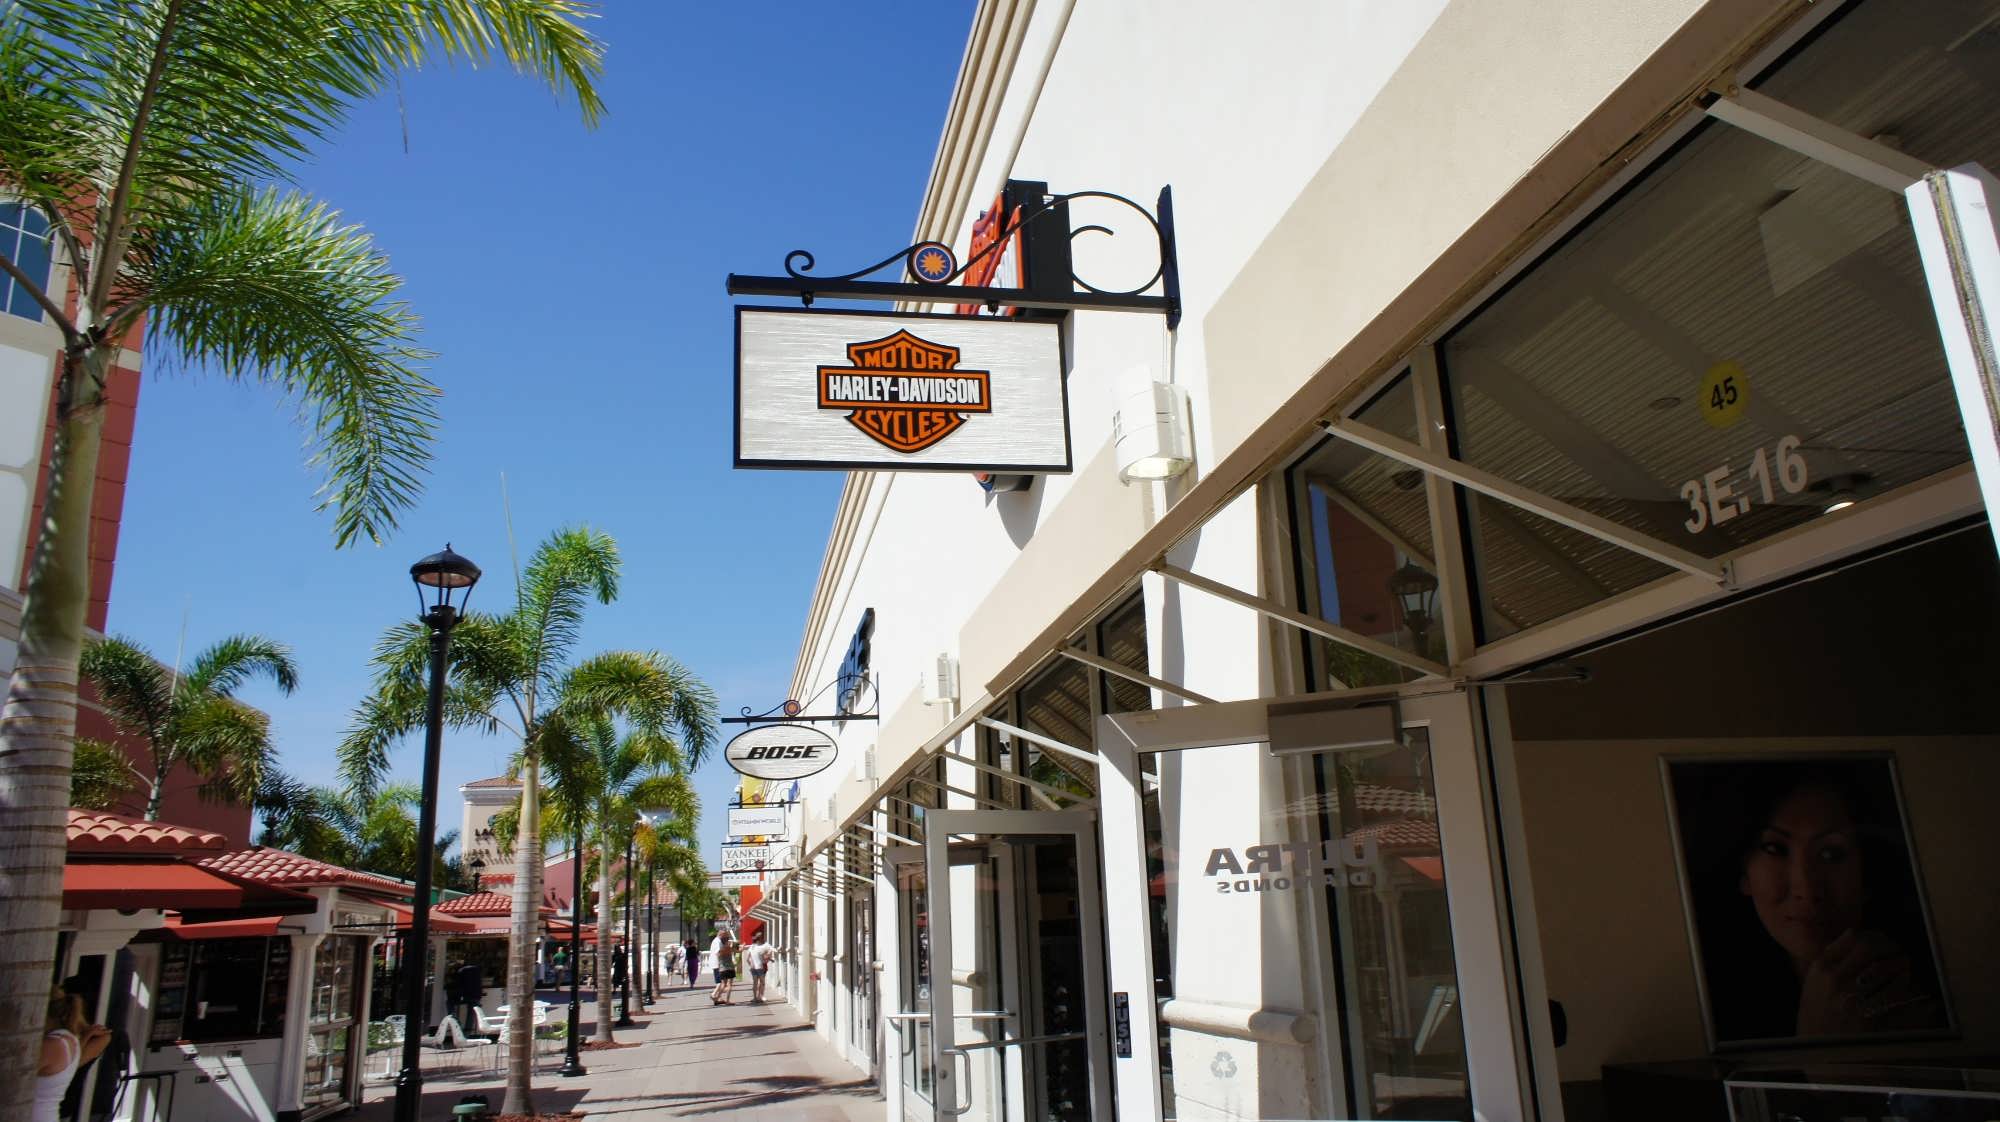 Best Shopping in Orlando - Outlet Malls & More